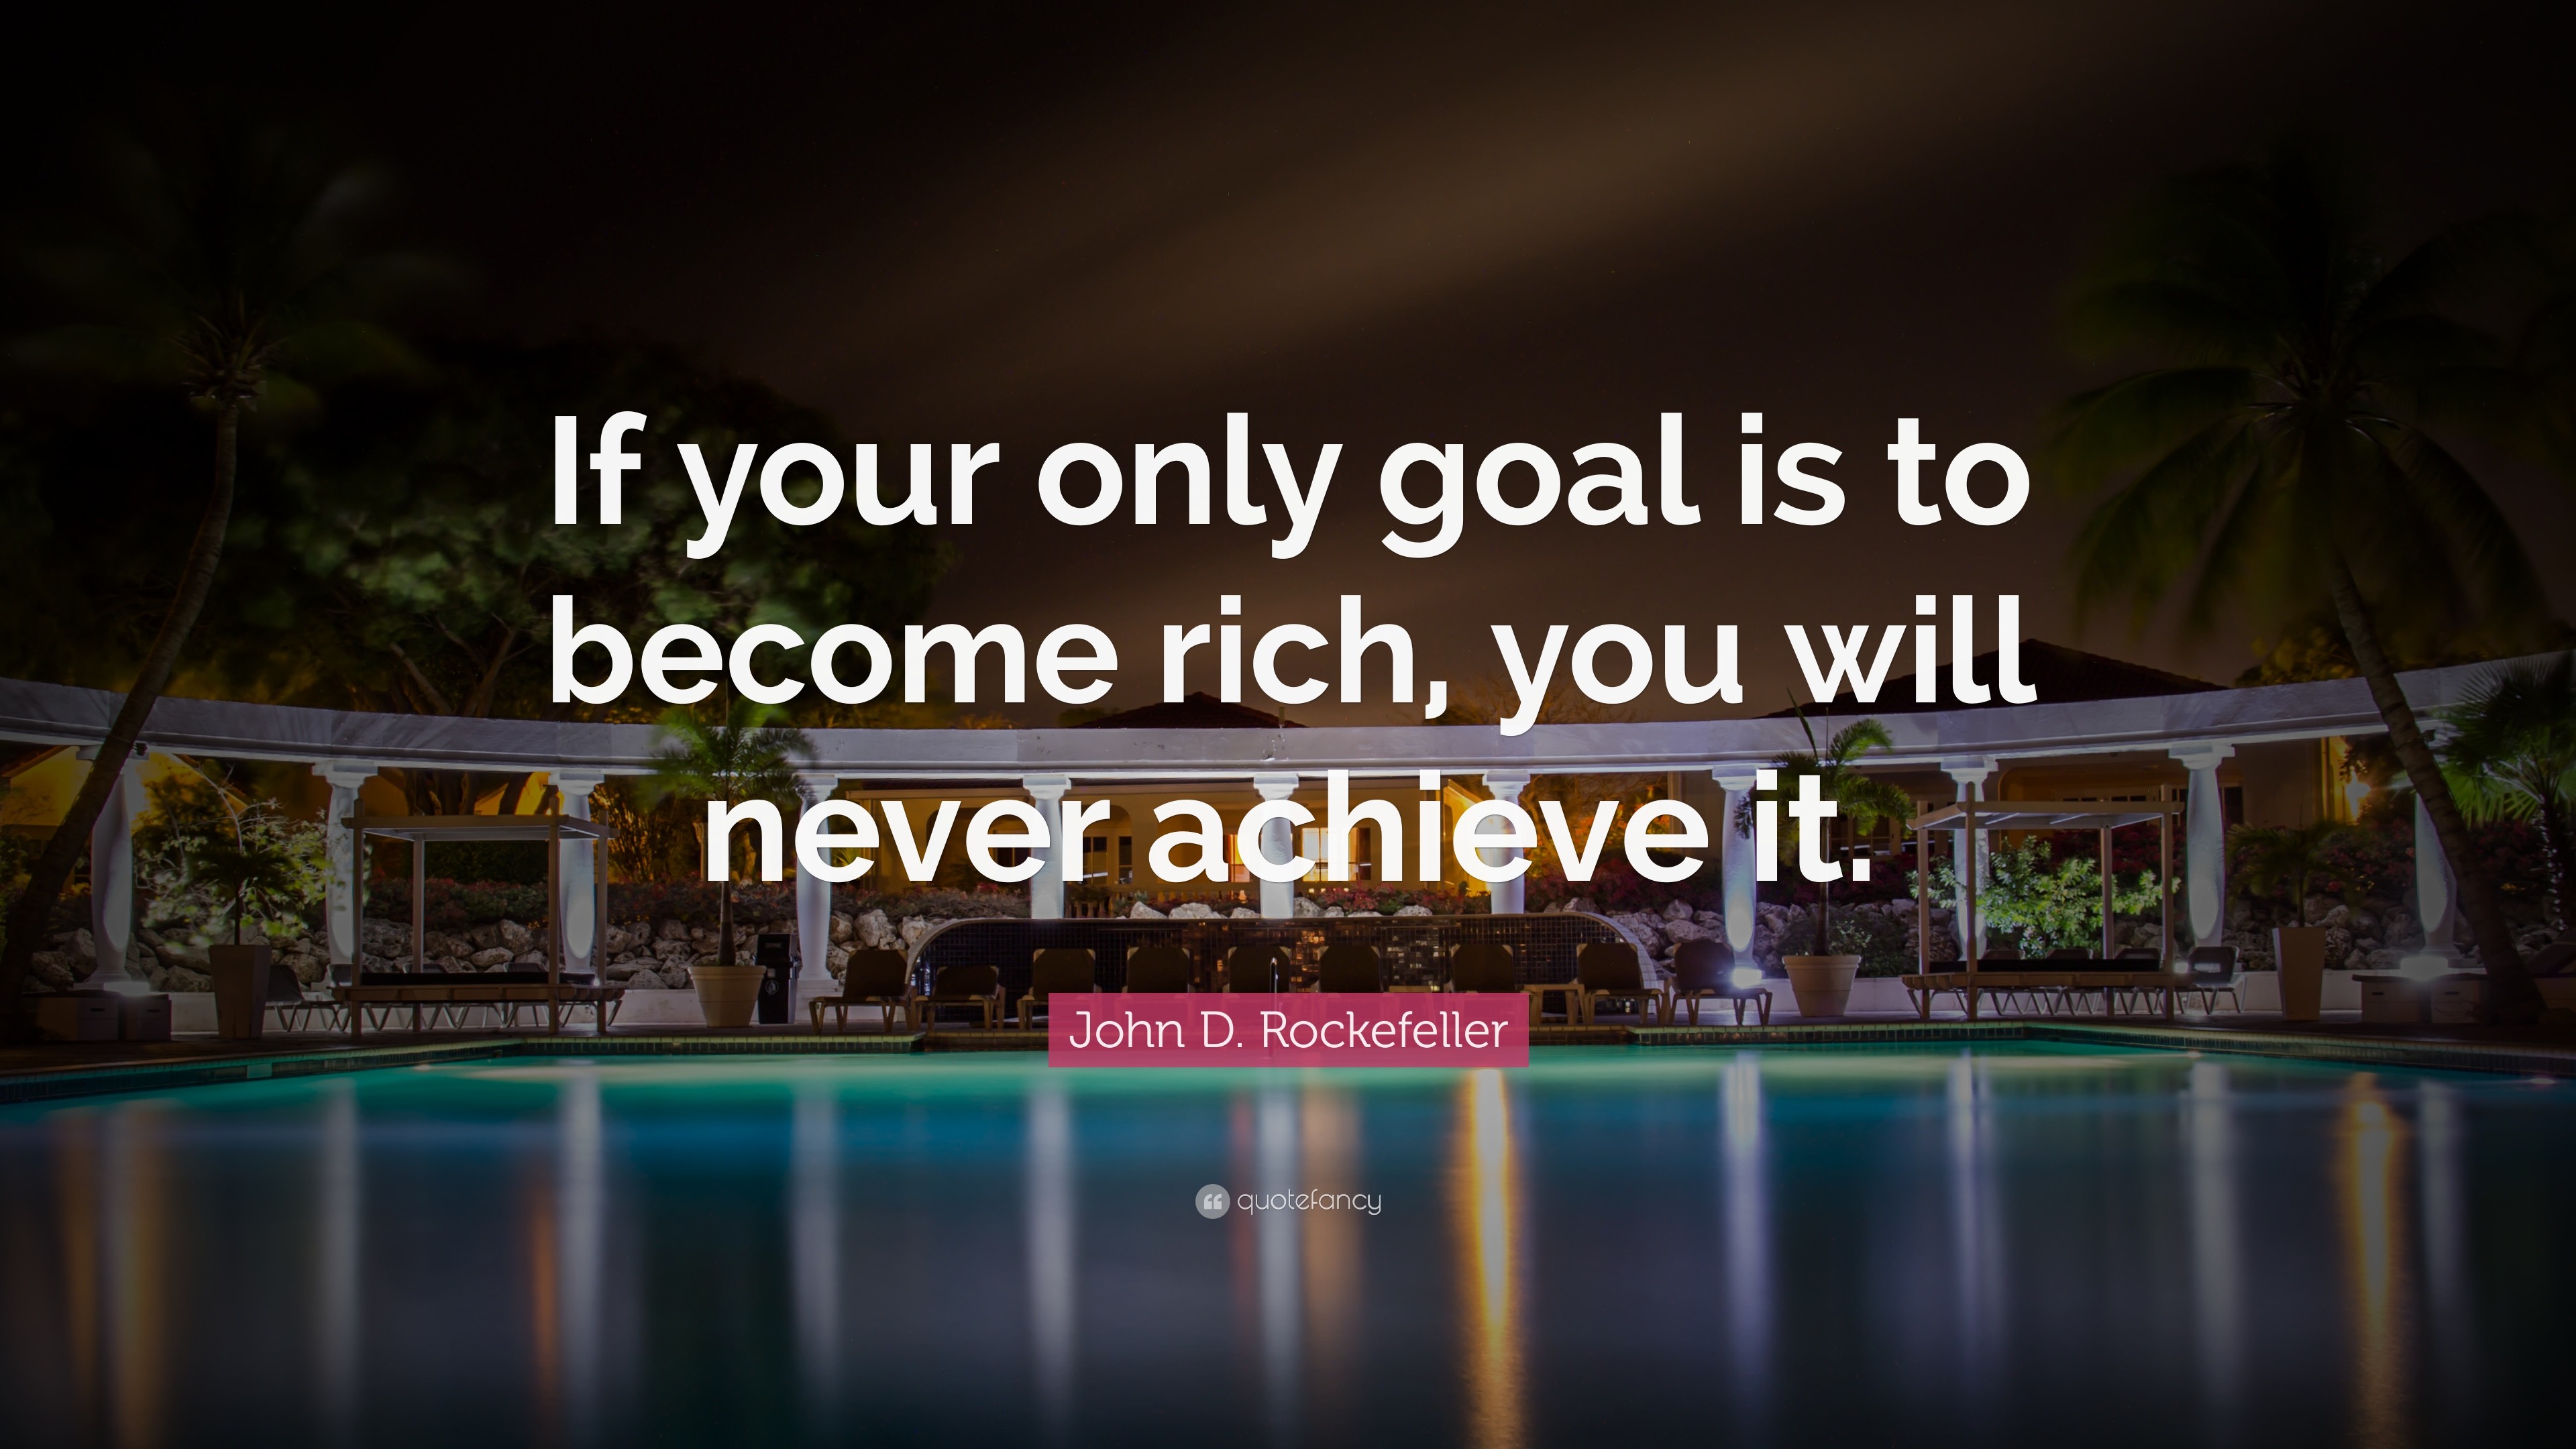 3840x2160 John D. Rockefeller Quote: “If your only goal is to become rich,